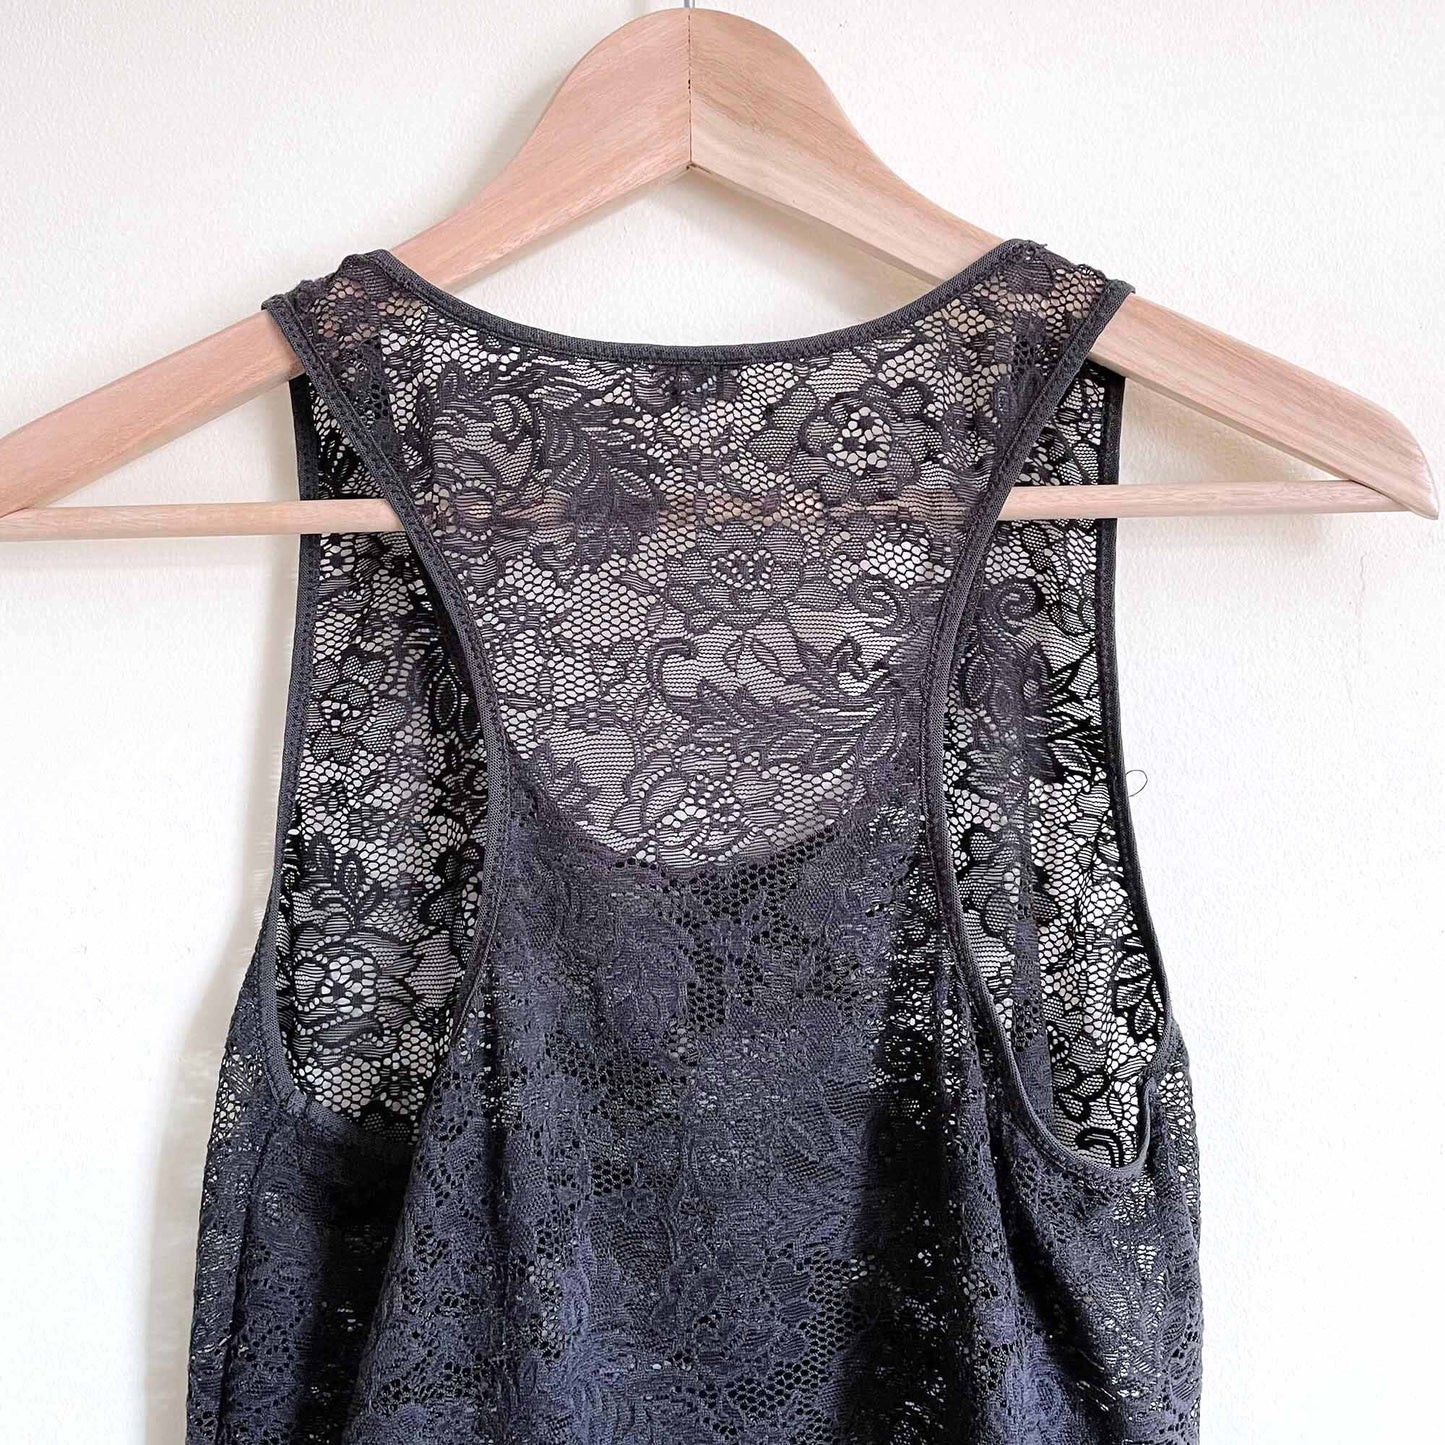 Wilfred stretch lace layering tank top - size Medium